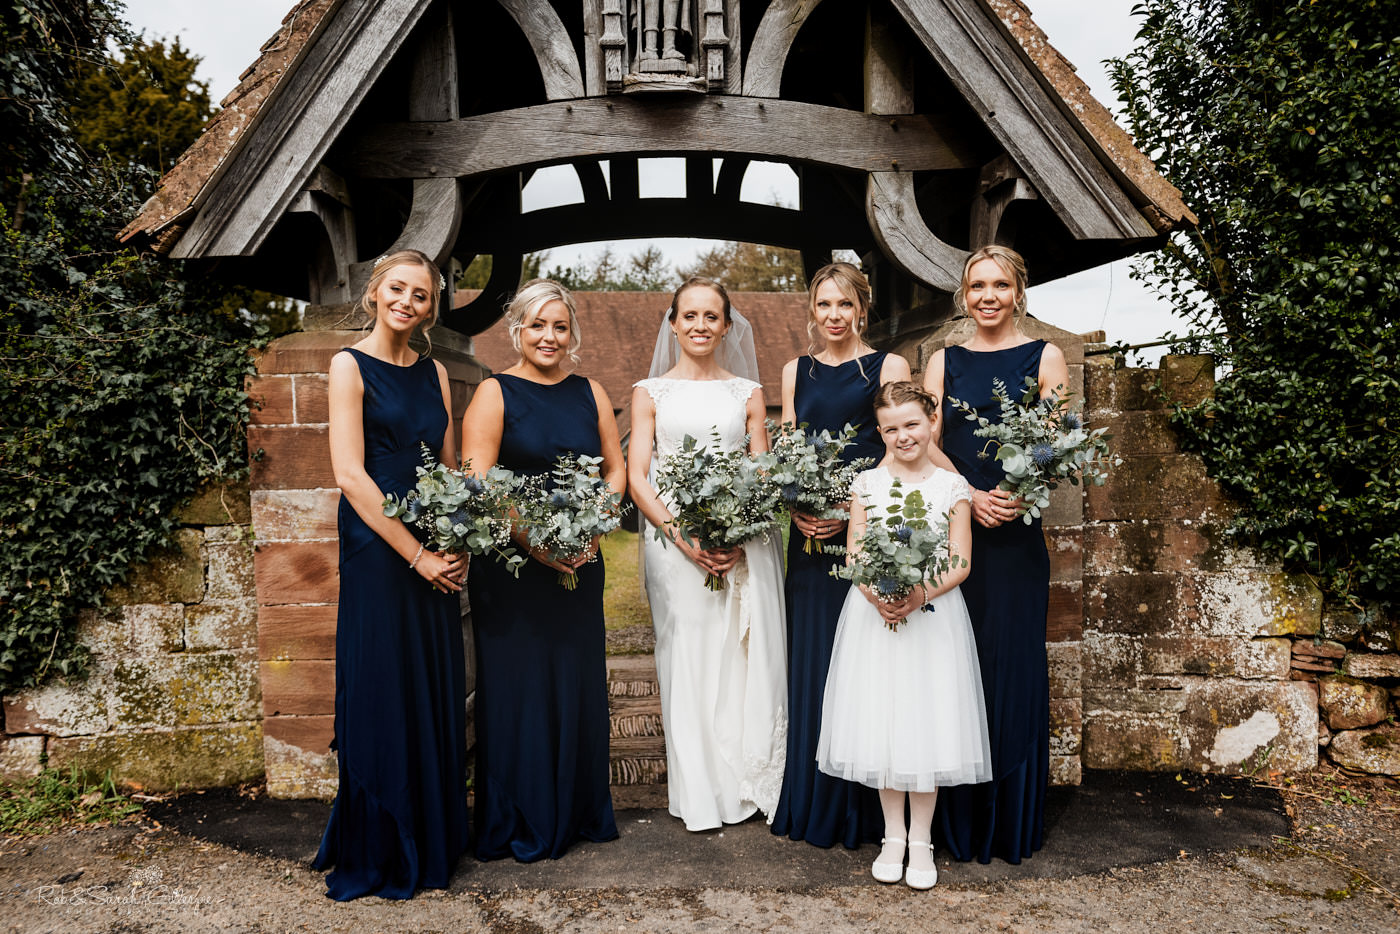 Bride and bridesmaids group photo at St Kenelm's church in Romsley, Worcestershire